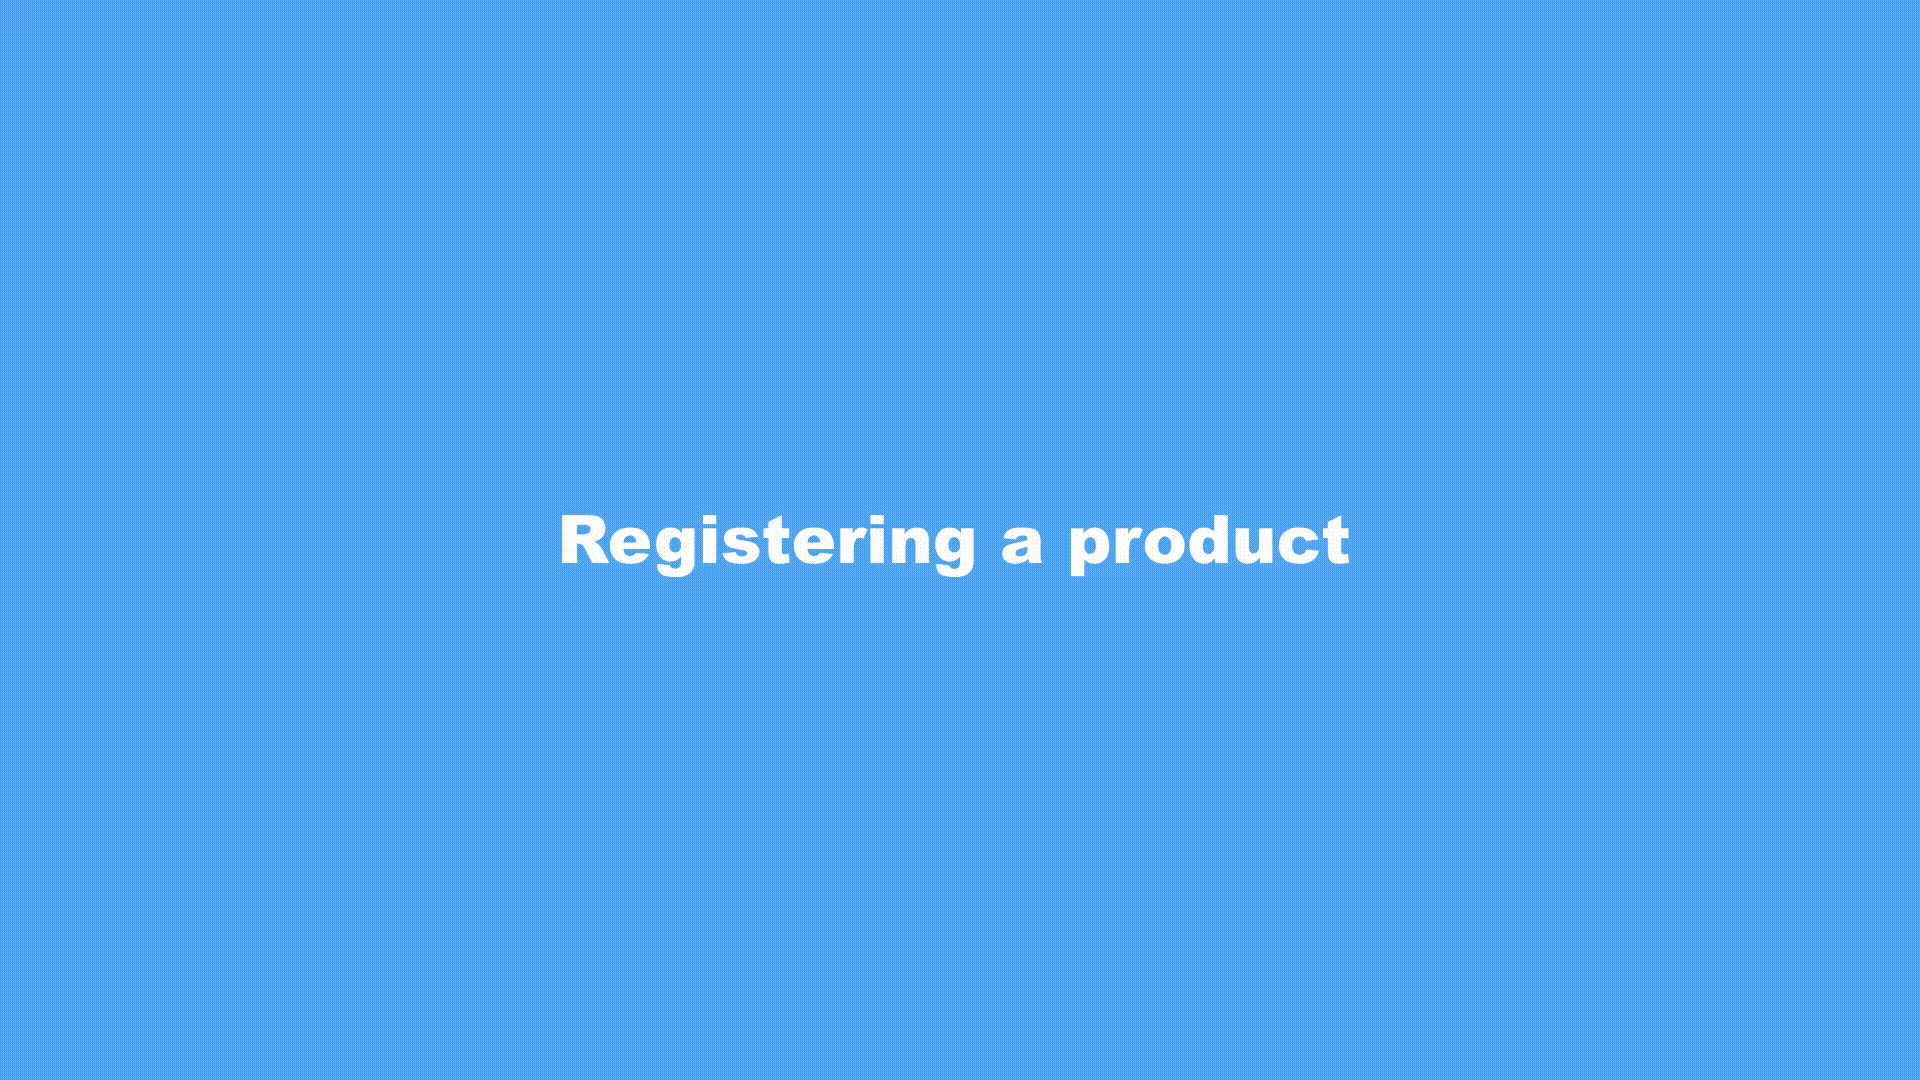 animation showing the steps to register a product